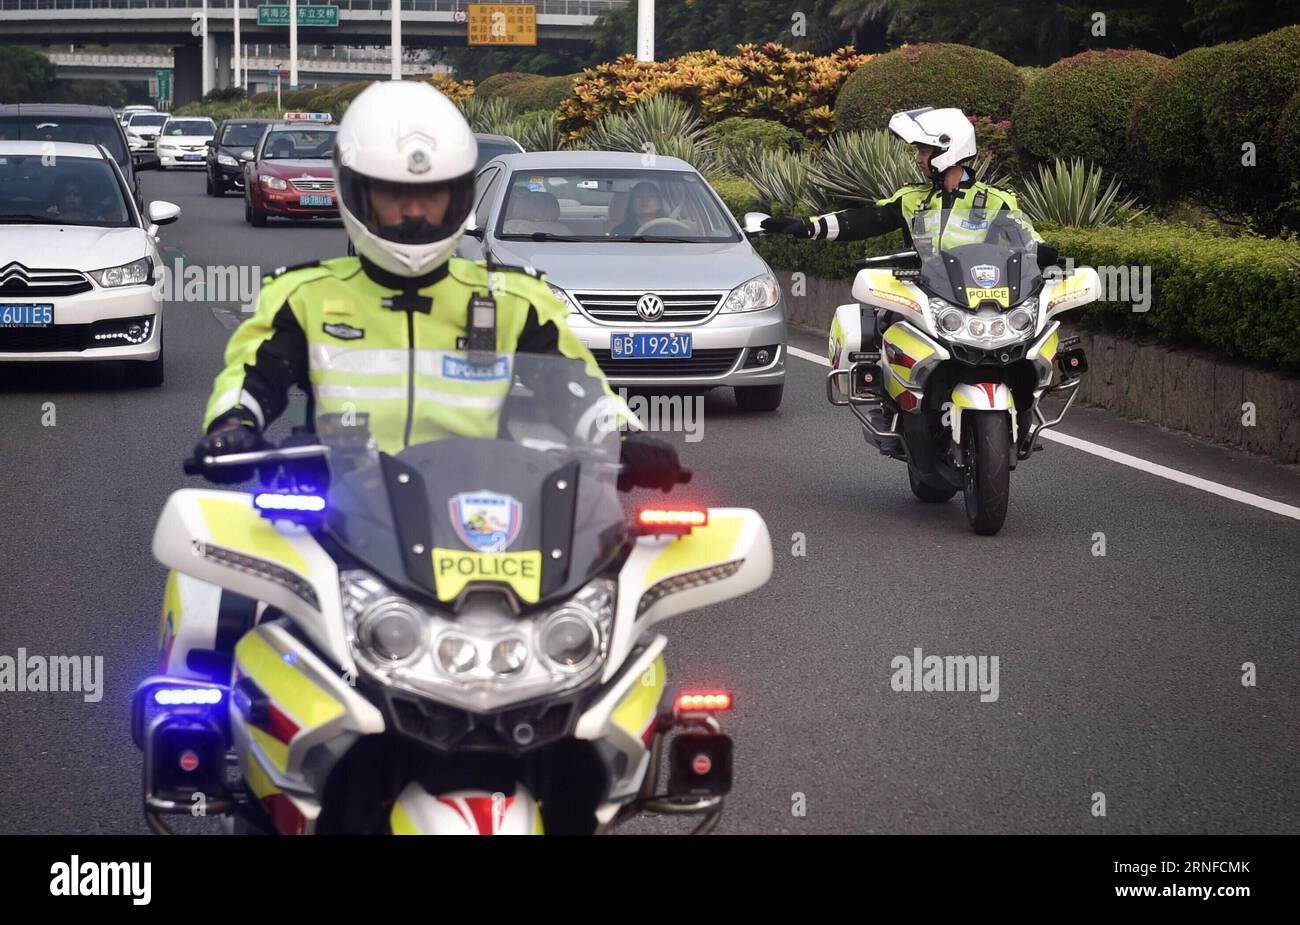 (160801) -- SHENZHEN , Aug. 1, 2016 -- Traffic policemen patrol along a high-occupancy vehicle lane (HOV lane) in Shenzhen, south China s Guangdong Province, Aug. 1, 2016. Shenzhen s first HOV lane was put into use on Monday to increase average vehicle occupancy with the goal of reducing traffic congestion and air pollution. ) (wyl) CHINA-SHENZHEN-TRAFFIC-HOV LANE (CN) MaoxSiqian PUBLICATIONxNOTxINxCHN   160801 Shenzhen Aug 1 2016 Traffic Policemen Patrol Along a High occupancy Vehicle Lane Hov Lane in Shenzhen South China S Guangdong Province Aug 1 2016 Shenzhen S First Hov Lane what Put into Stock Photo